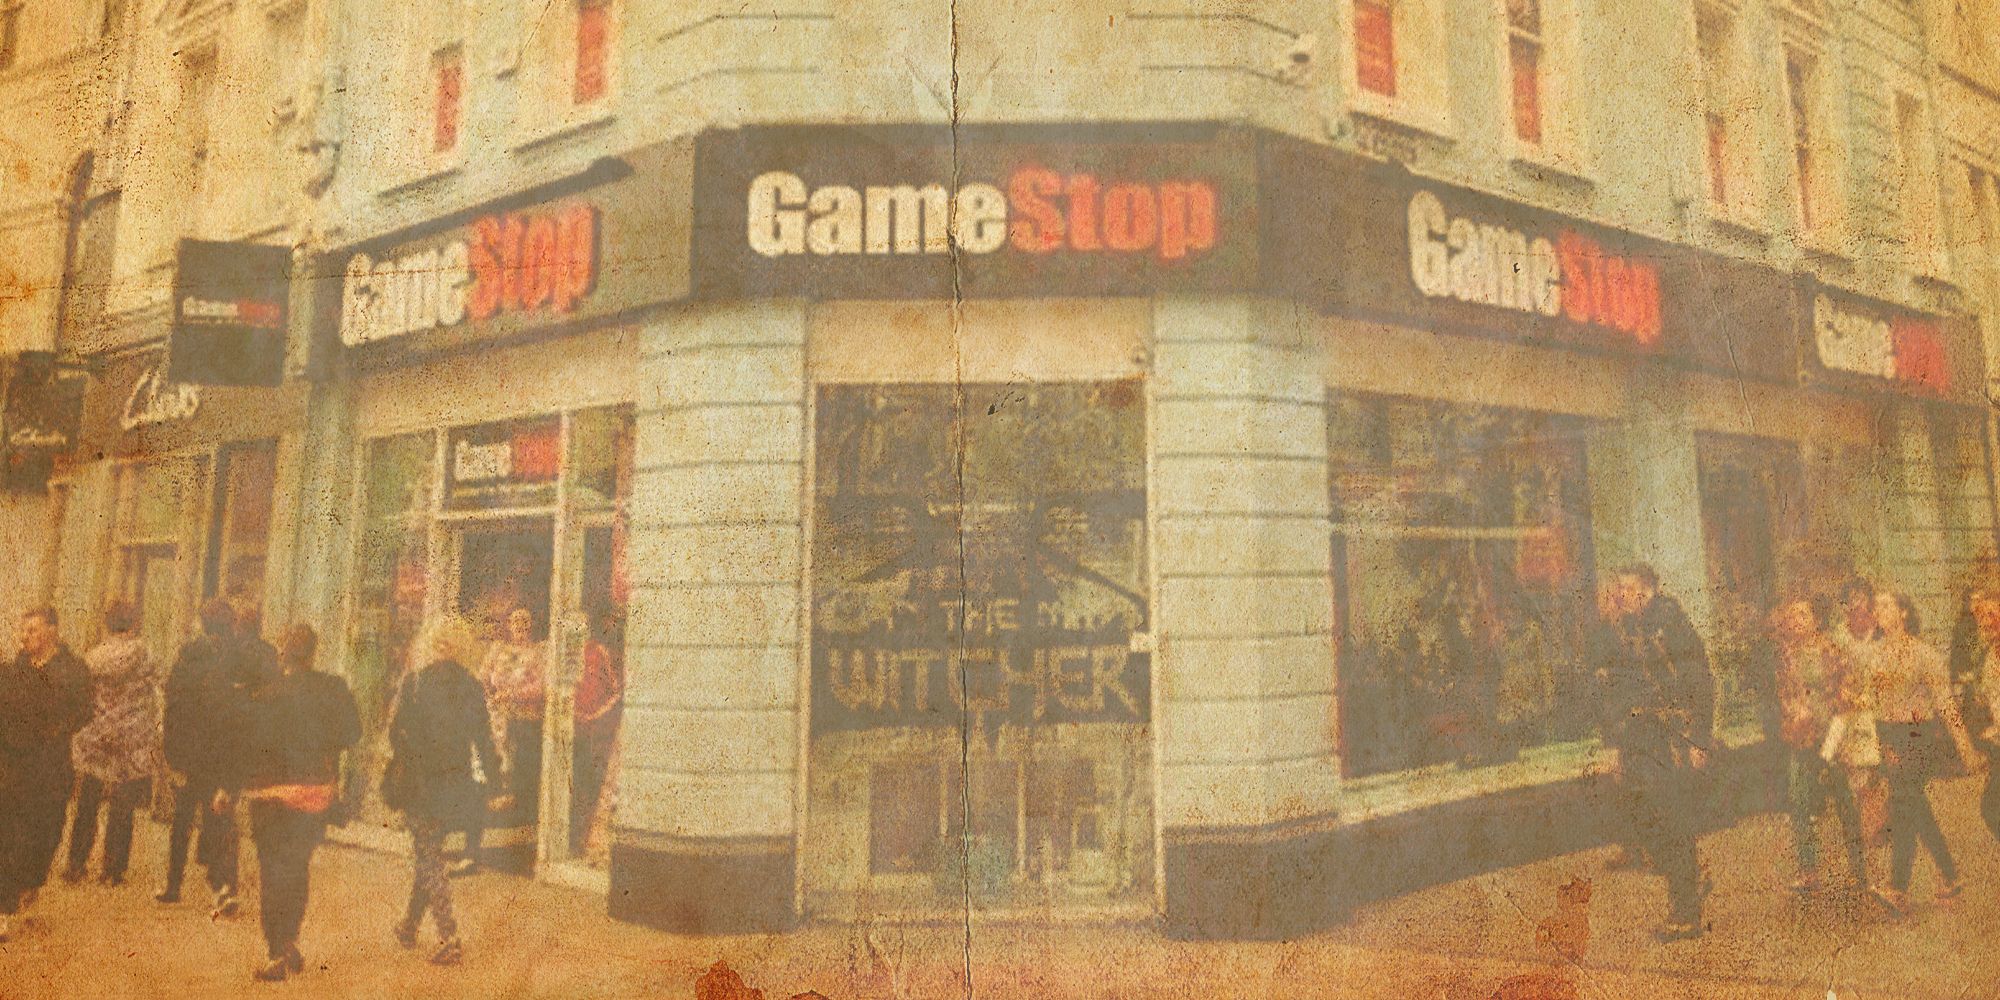 Gamestop Is Dying And Its Hard To Watch Featured Image - Cork City Gamestop in Ireland through nostaglia lense